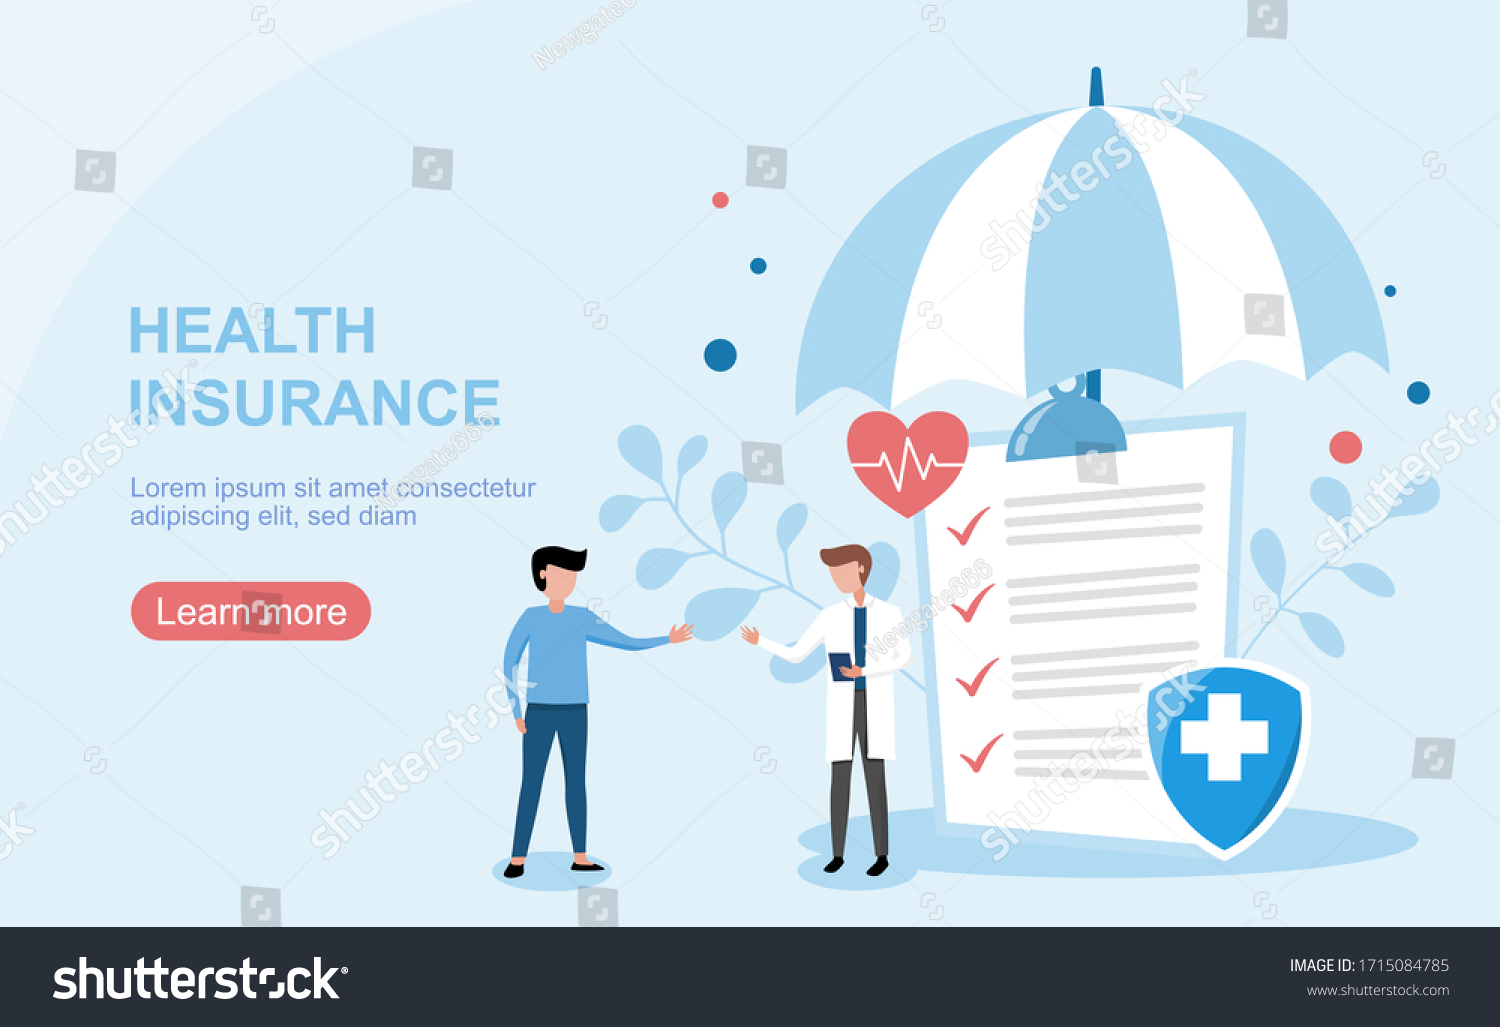 Health insurance concept.Healthcare, finance and medical service. Vector illustration about health insurance. #1715084785